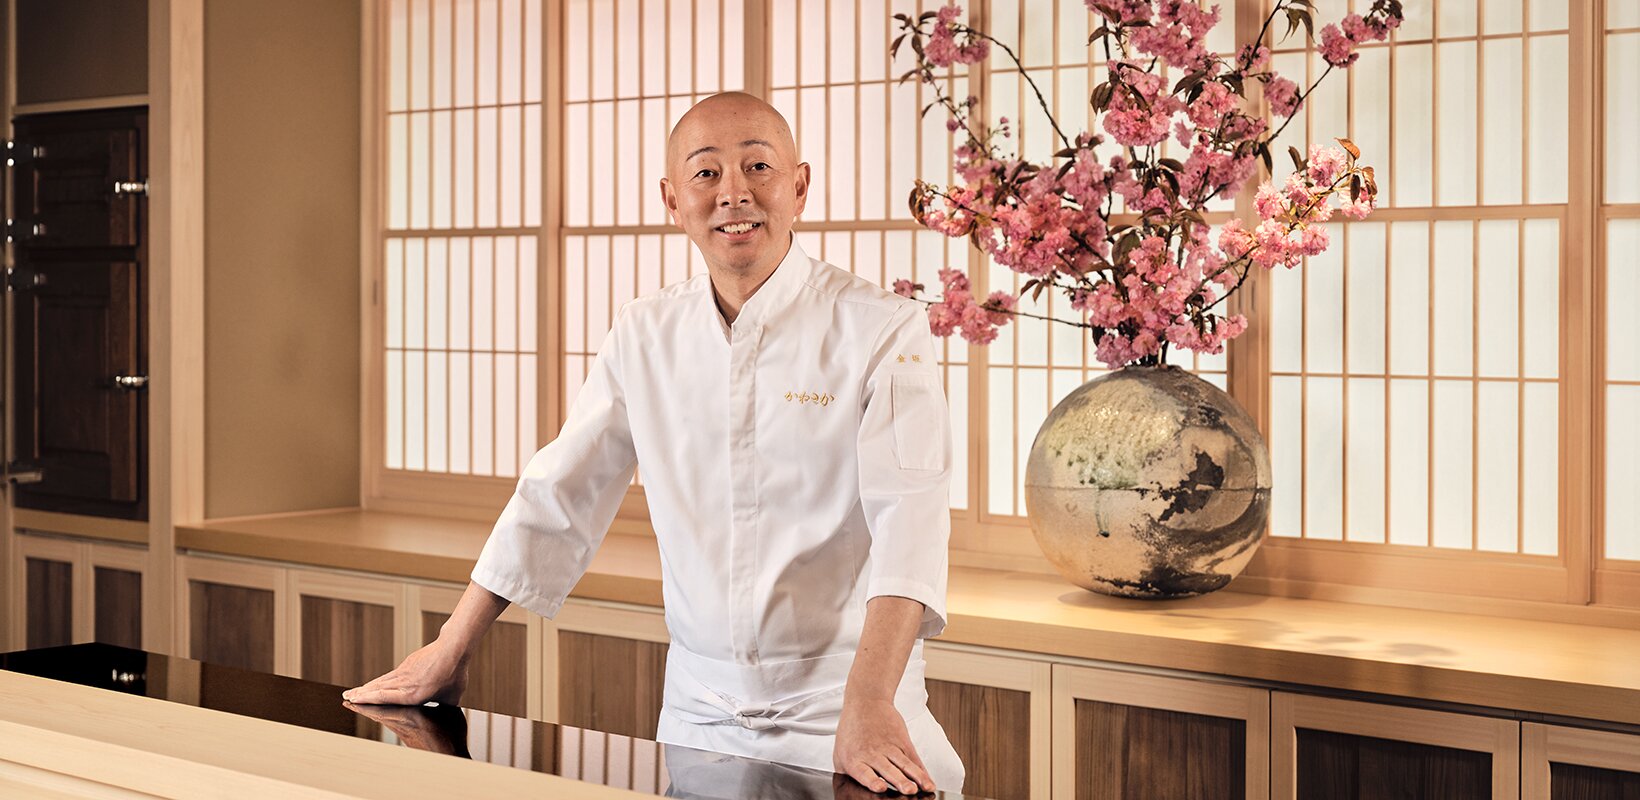 Omakase dining requires trust in a top sushi chef